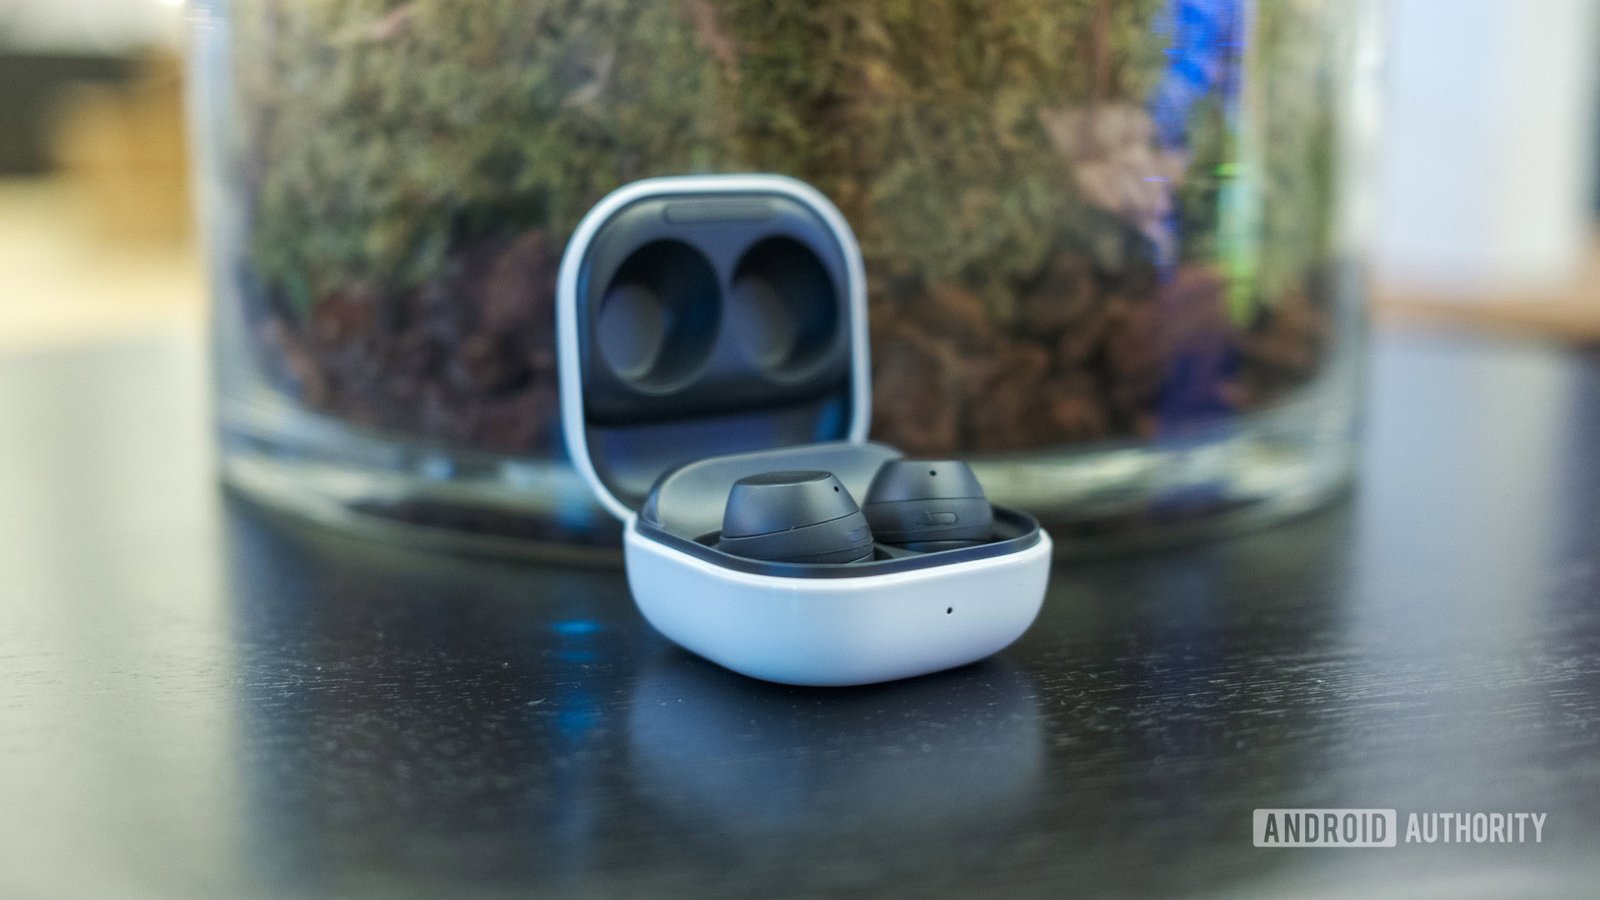 Samsung’s own app leaks major redesign of Galaxy Buds 3